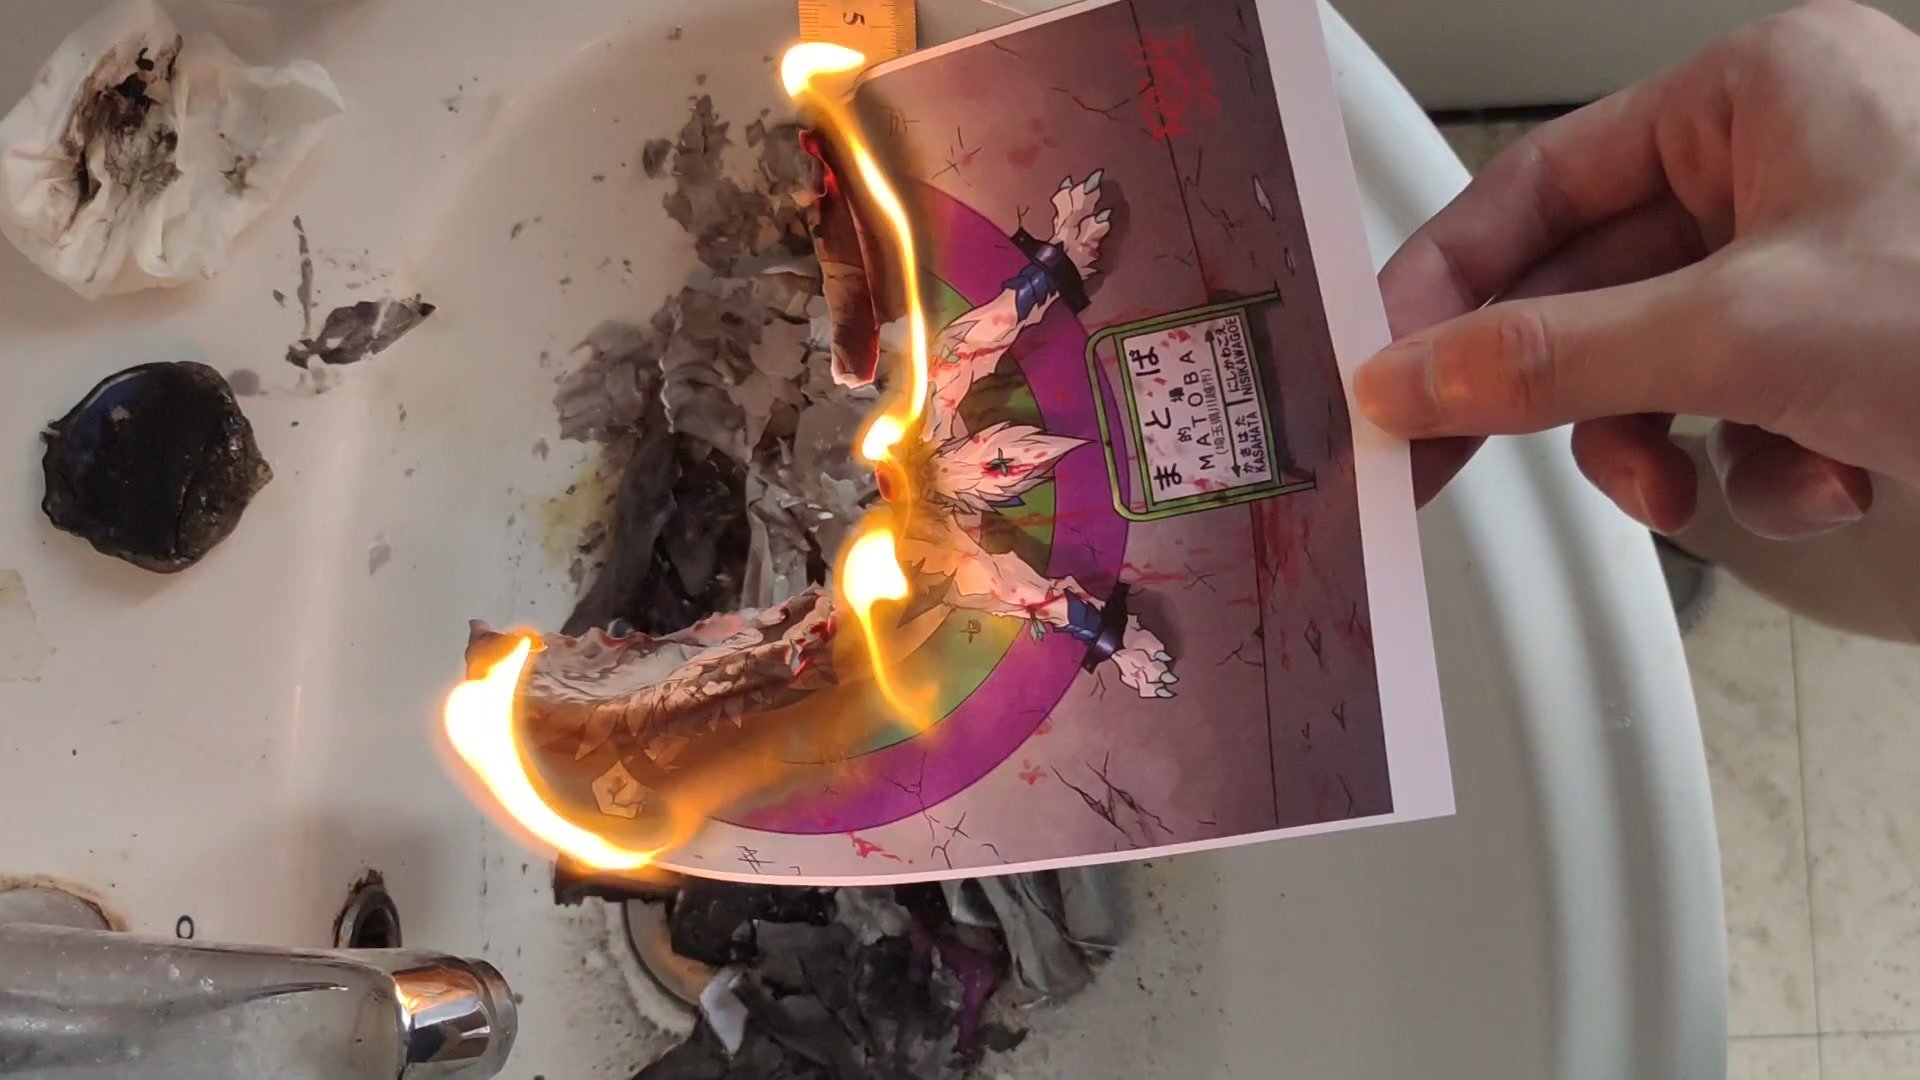 Enjoy the process of incinerating the Furry picture - video 2